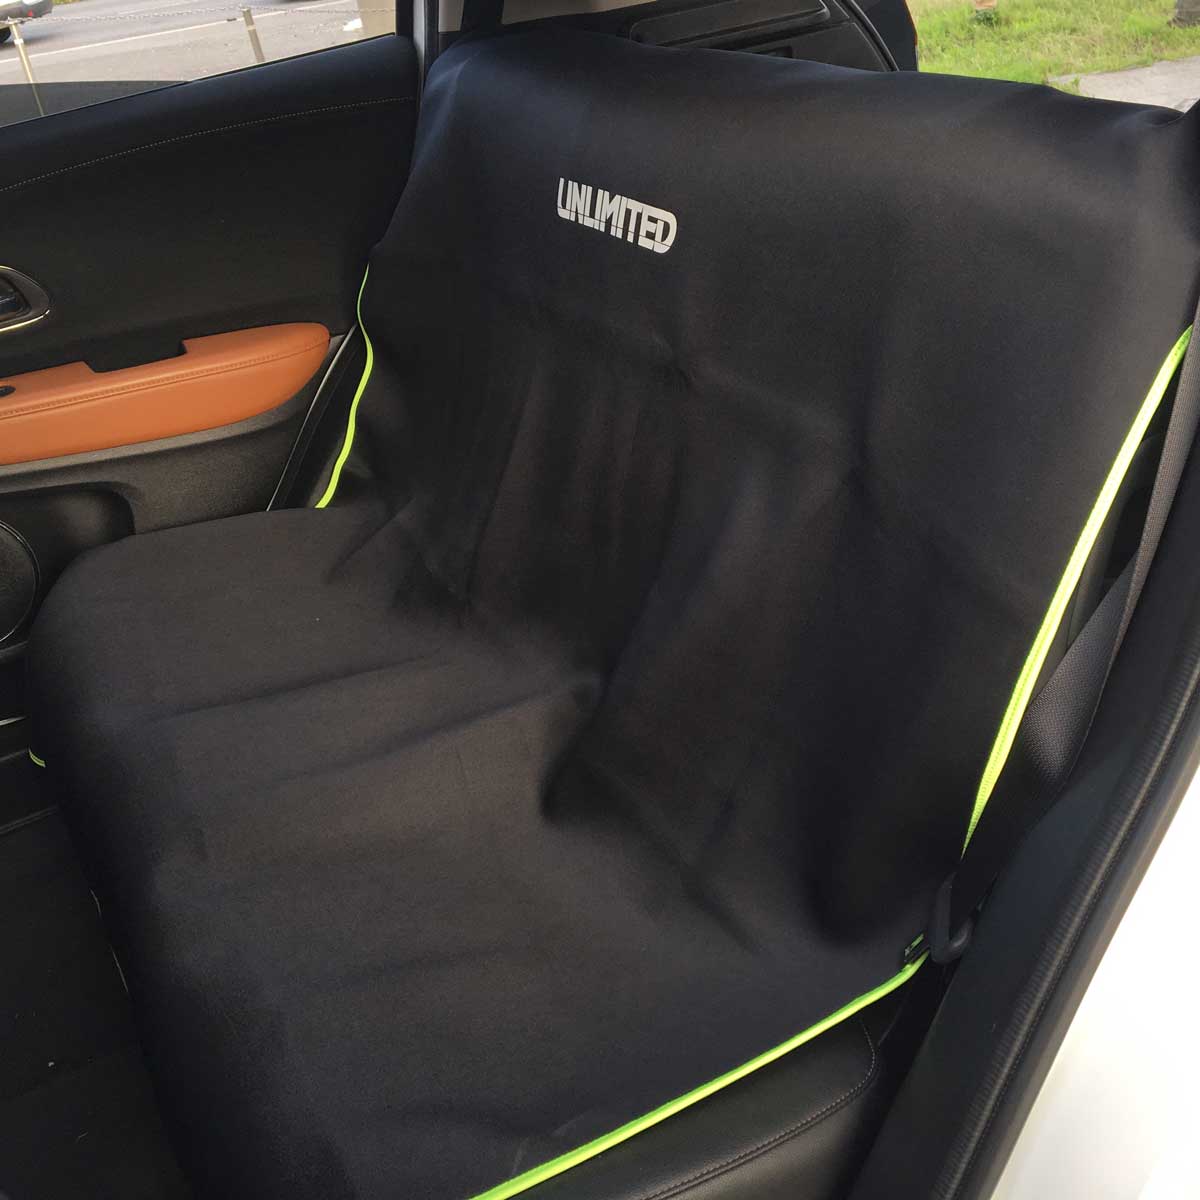 Seat Cover Wet Material Car Seat Cover Automobile Rear Seat Rear Seat Trunk ULC5521 Unlimited Stain Resistant Waterproof UNLIMITED